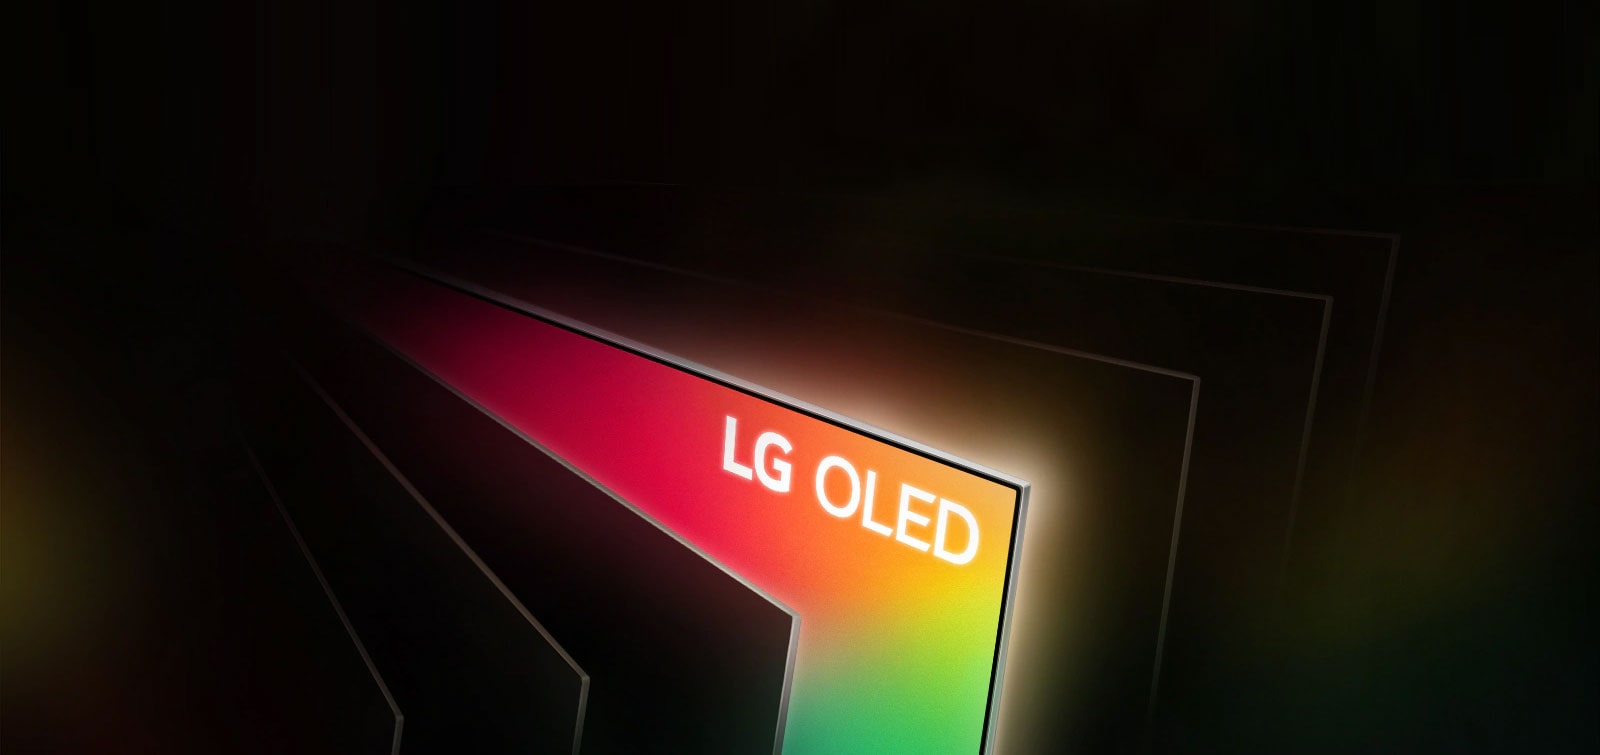 An angled bird's eye view of a row of televisions spanned out like the pages of a book. All the televisions are black, except one filled with bright colors and the words "LG OLED.